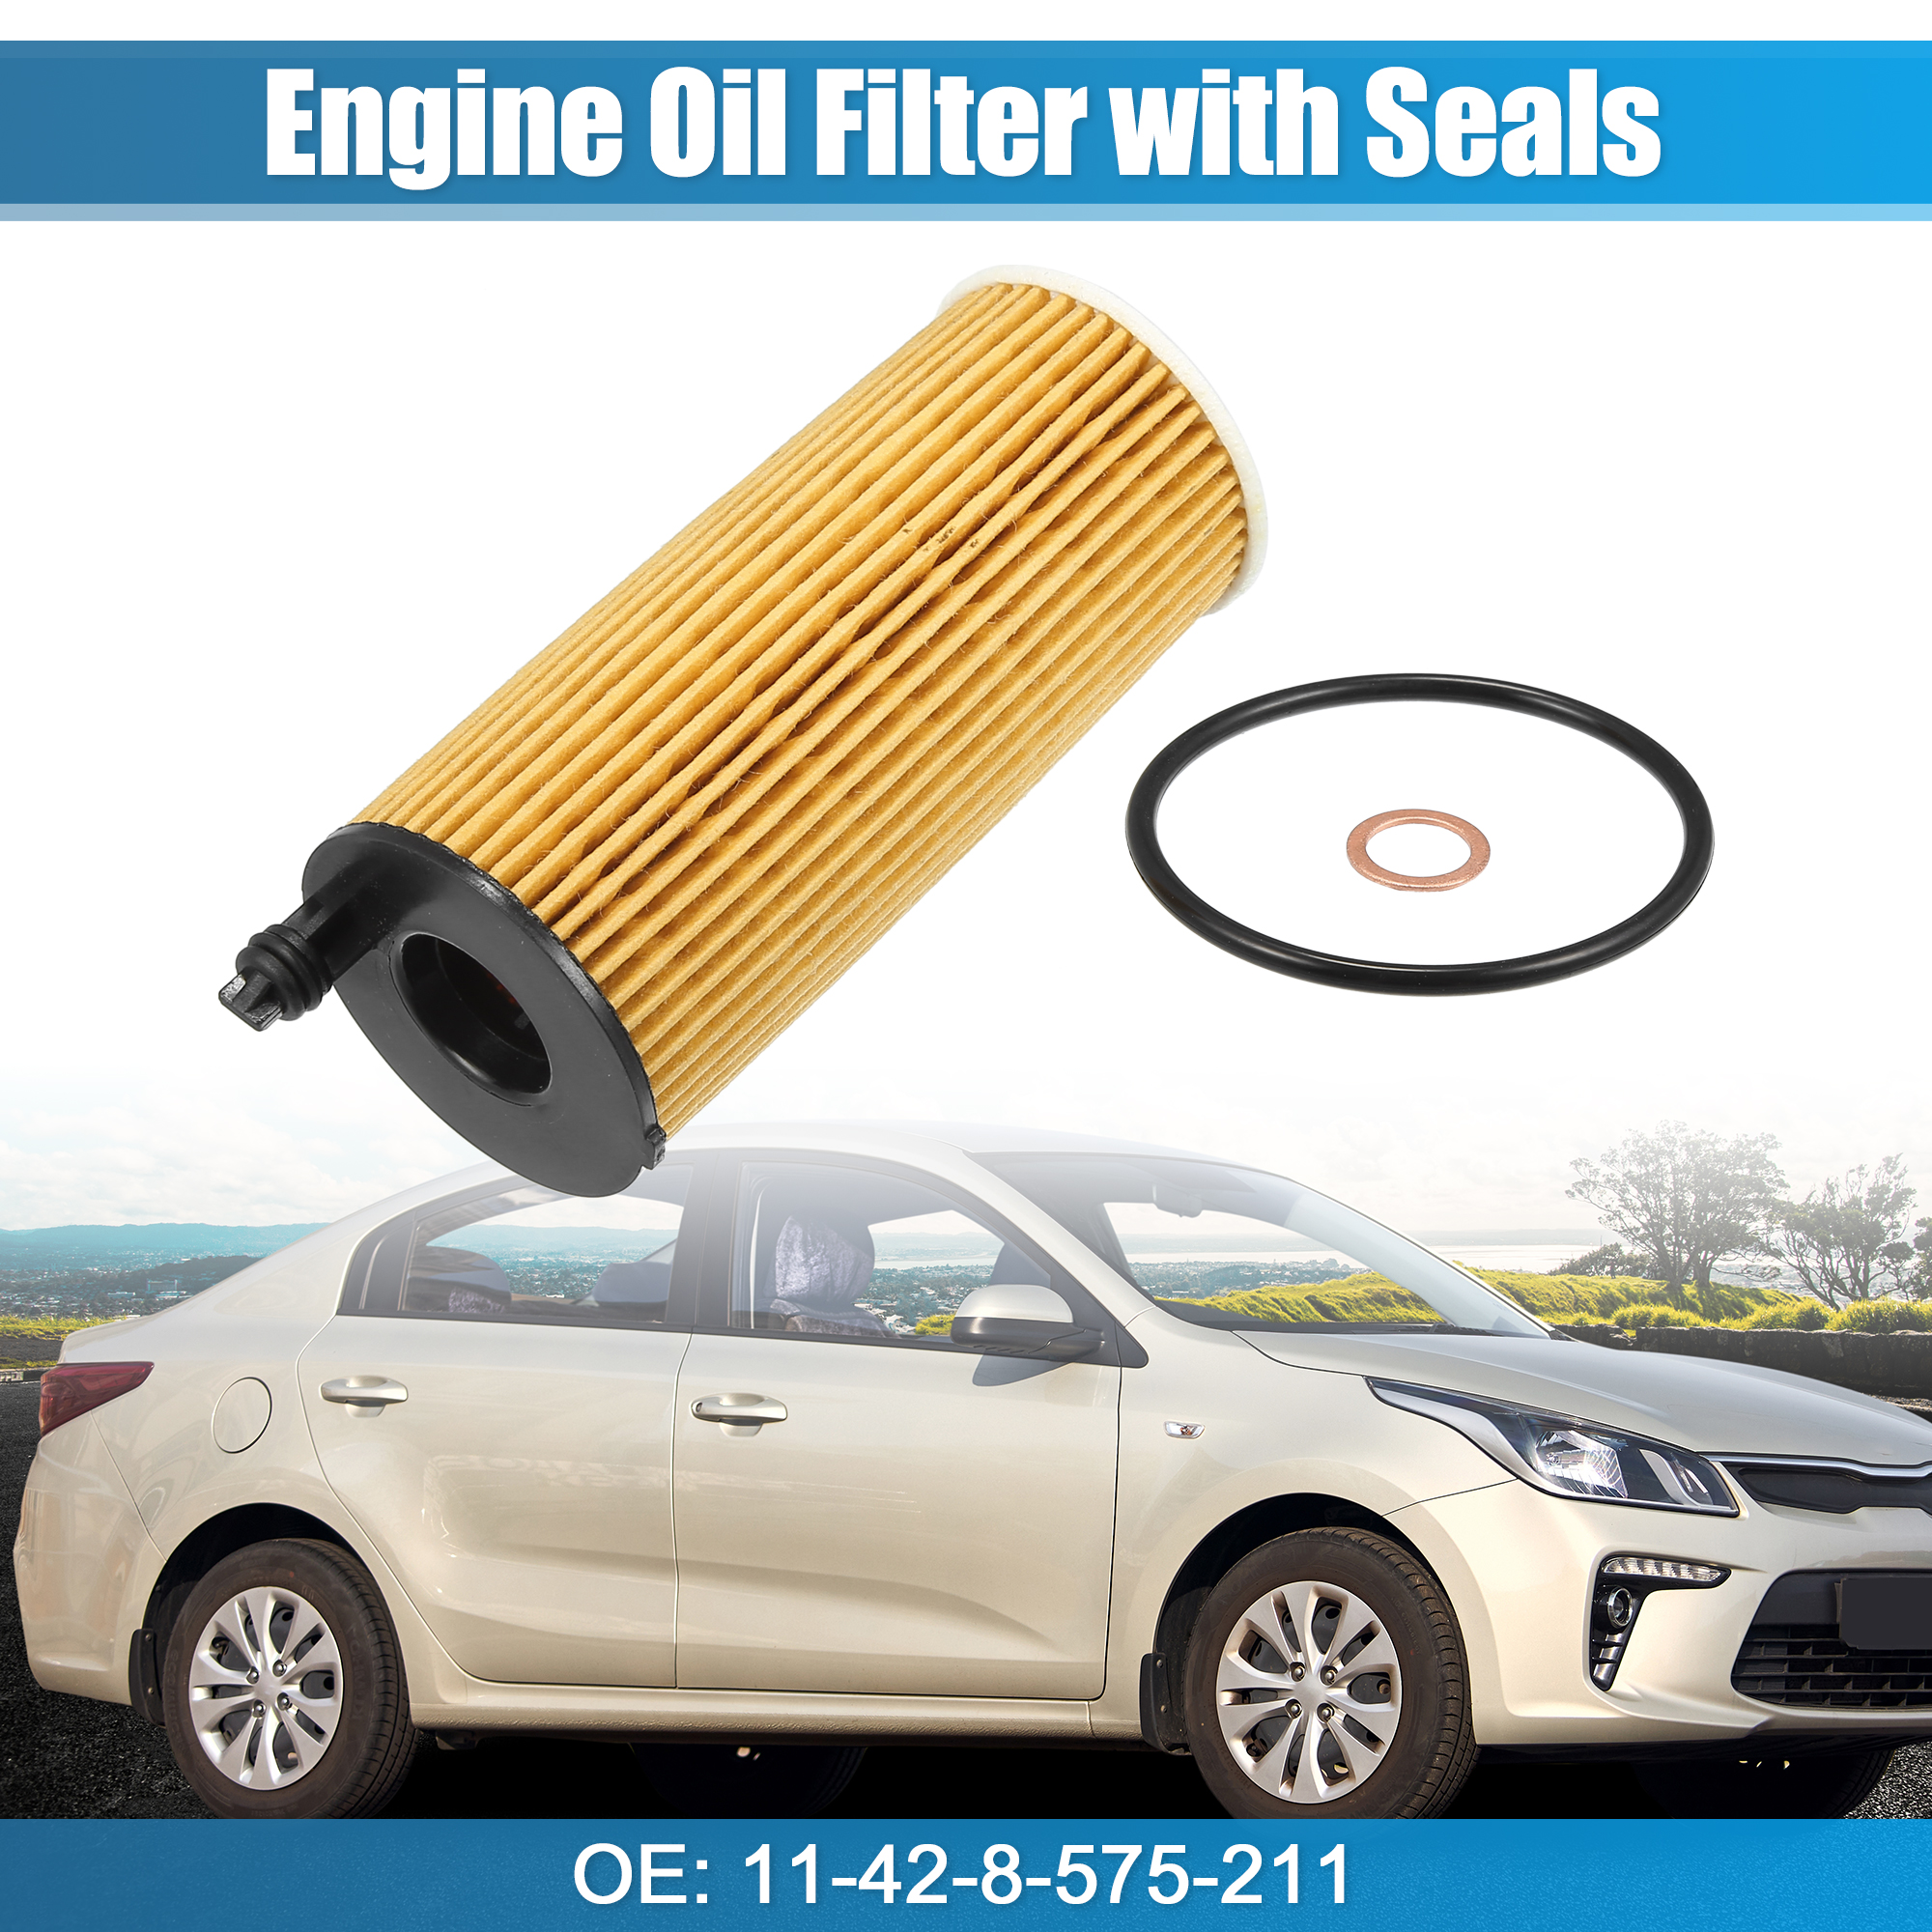 Unique Bargains Engine Oil Filter Replacement 11-42-8-575-211 Oil Fuel Filter for BMW X3